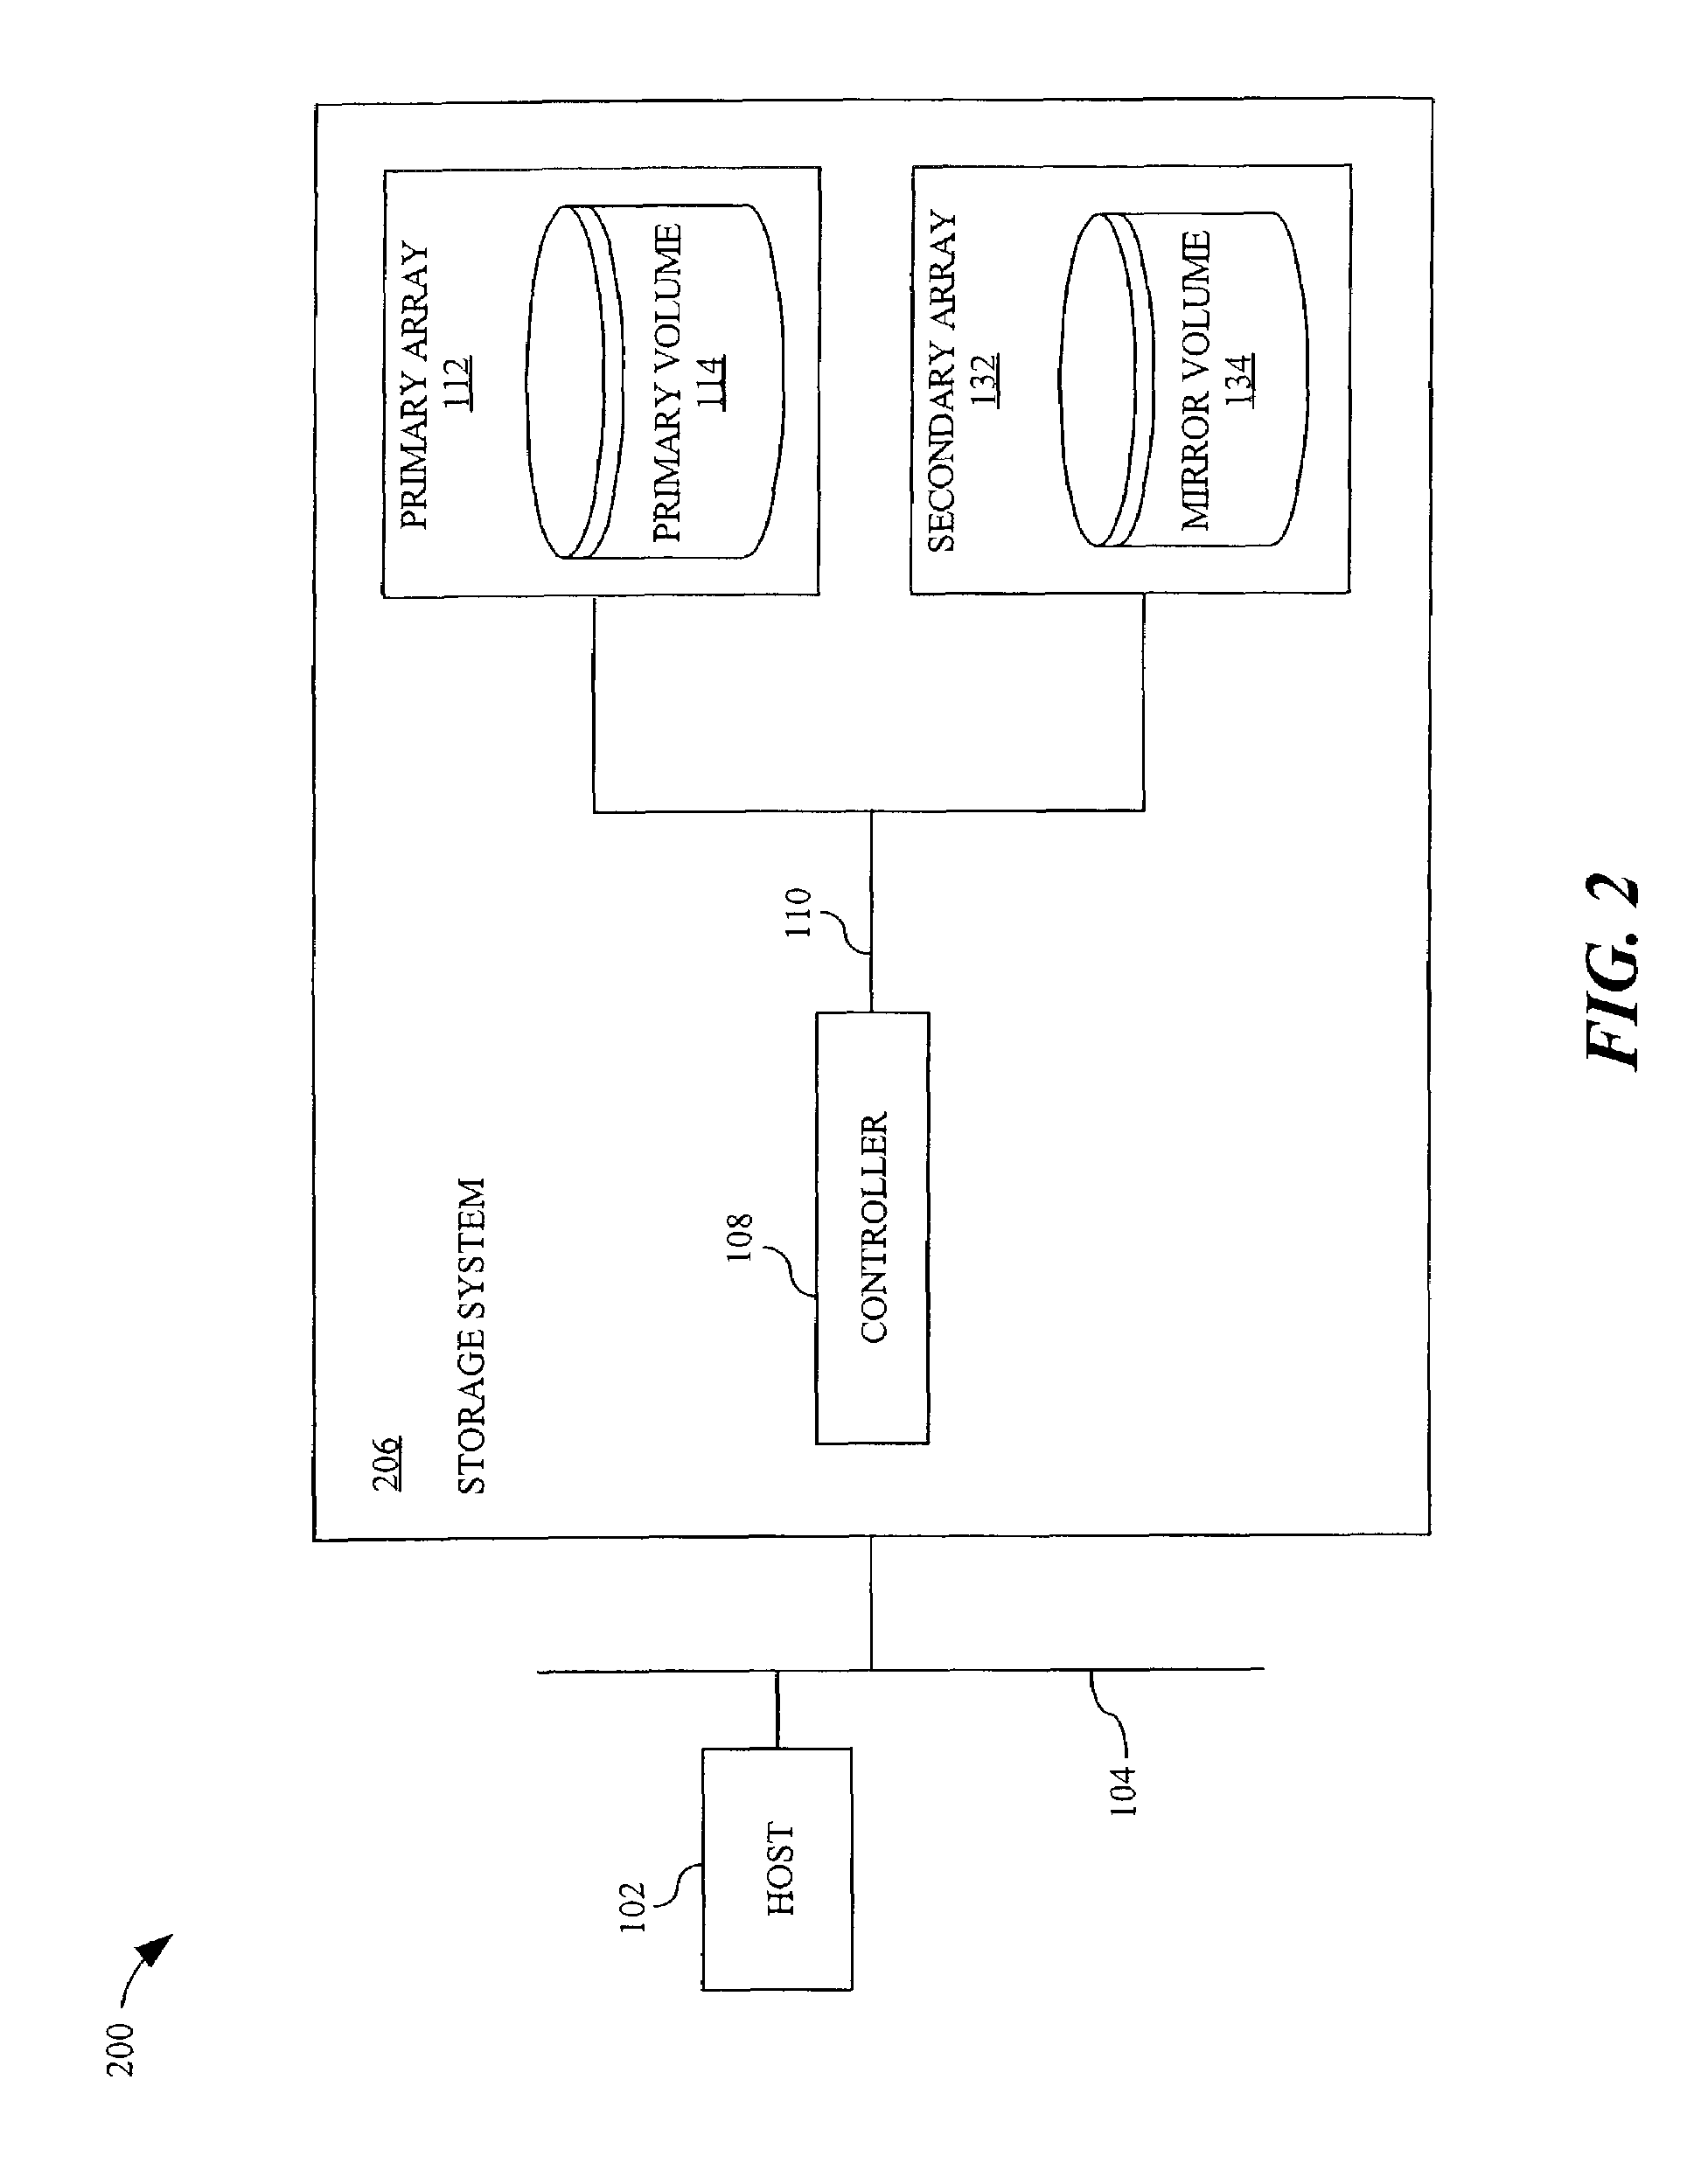 Apparatus and method for enhancing data availability by implementing inter-storage-unit communication